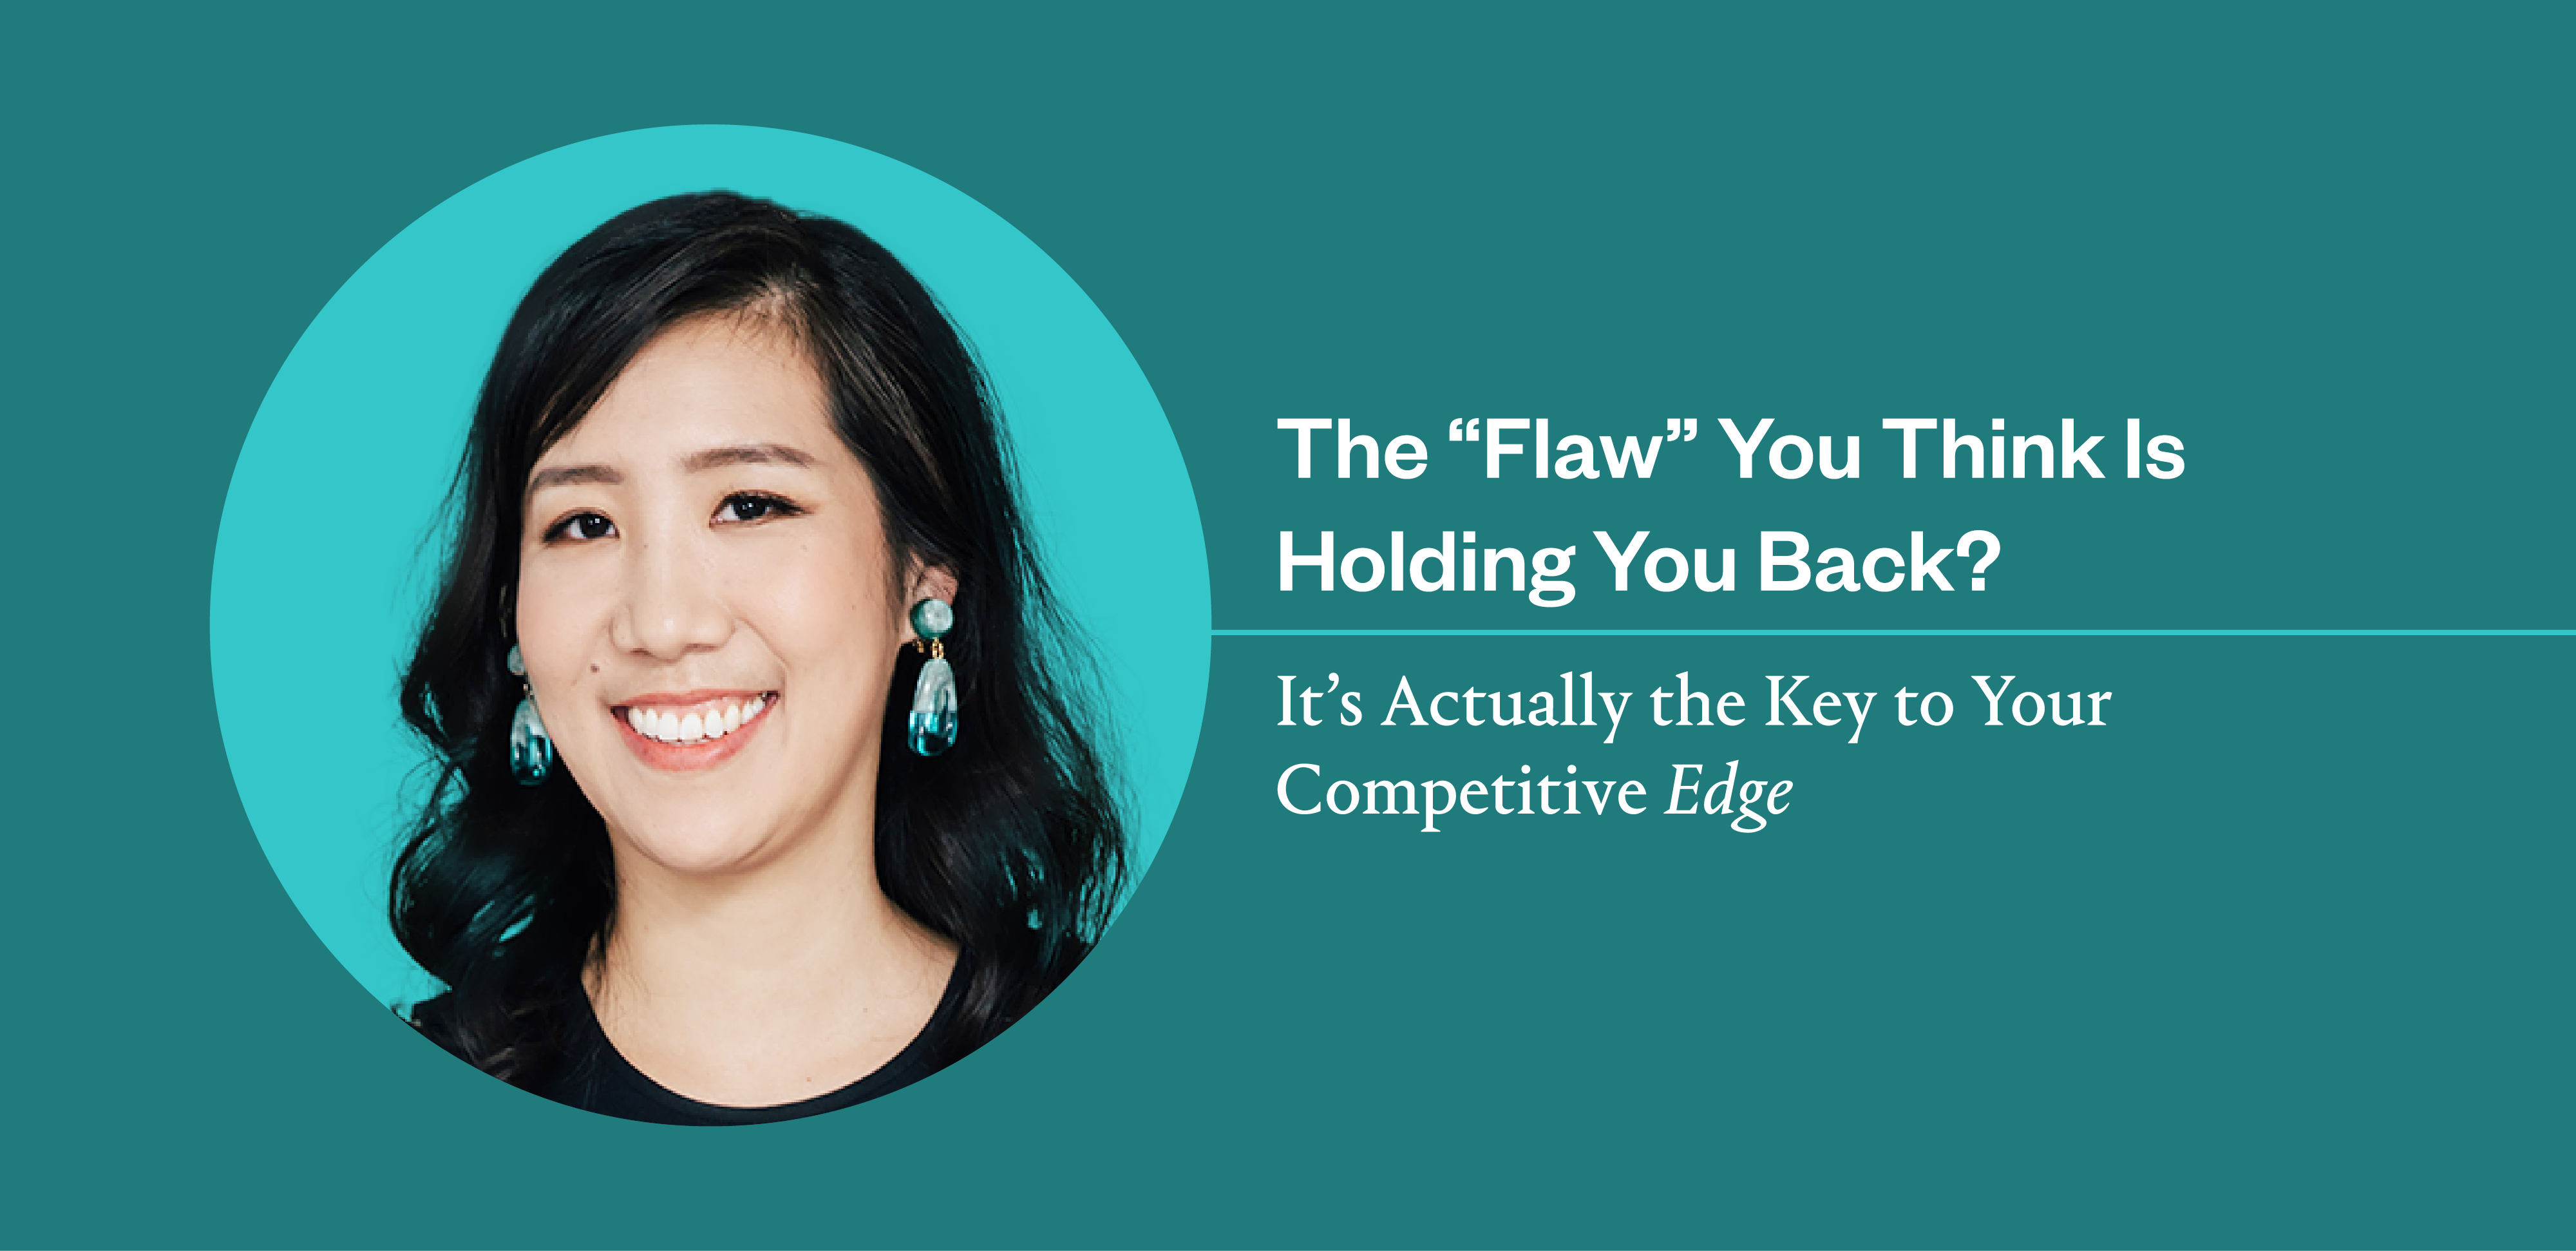 That “Flaw” Holding You Back? It’s the Key to Your Competitive Edge. “40 Under 40” Business Prof Laura Huang